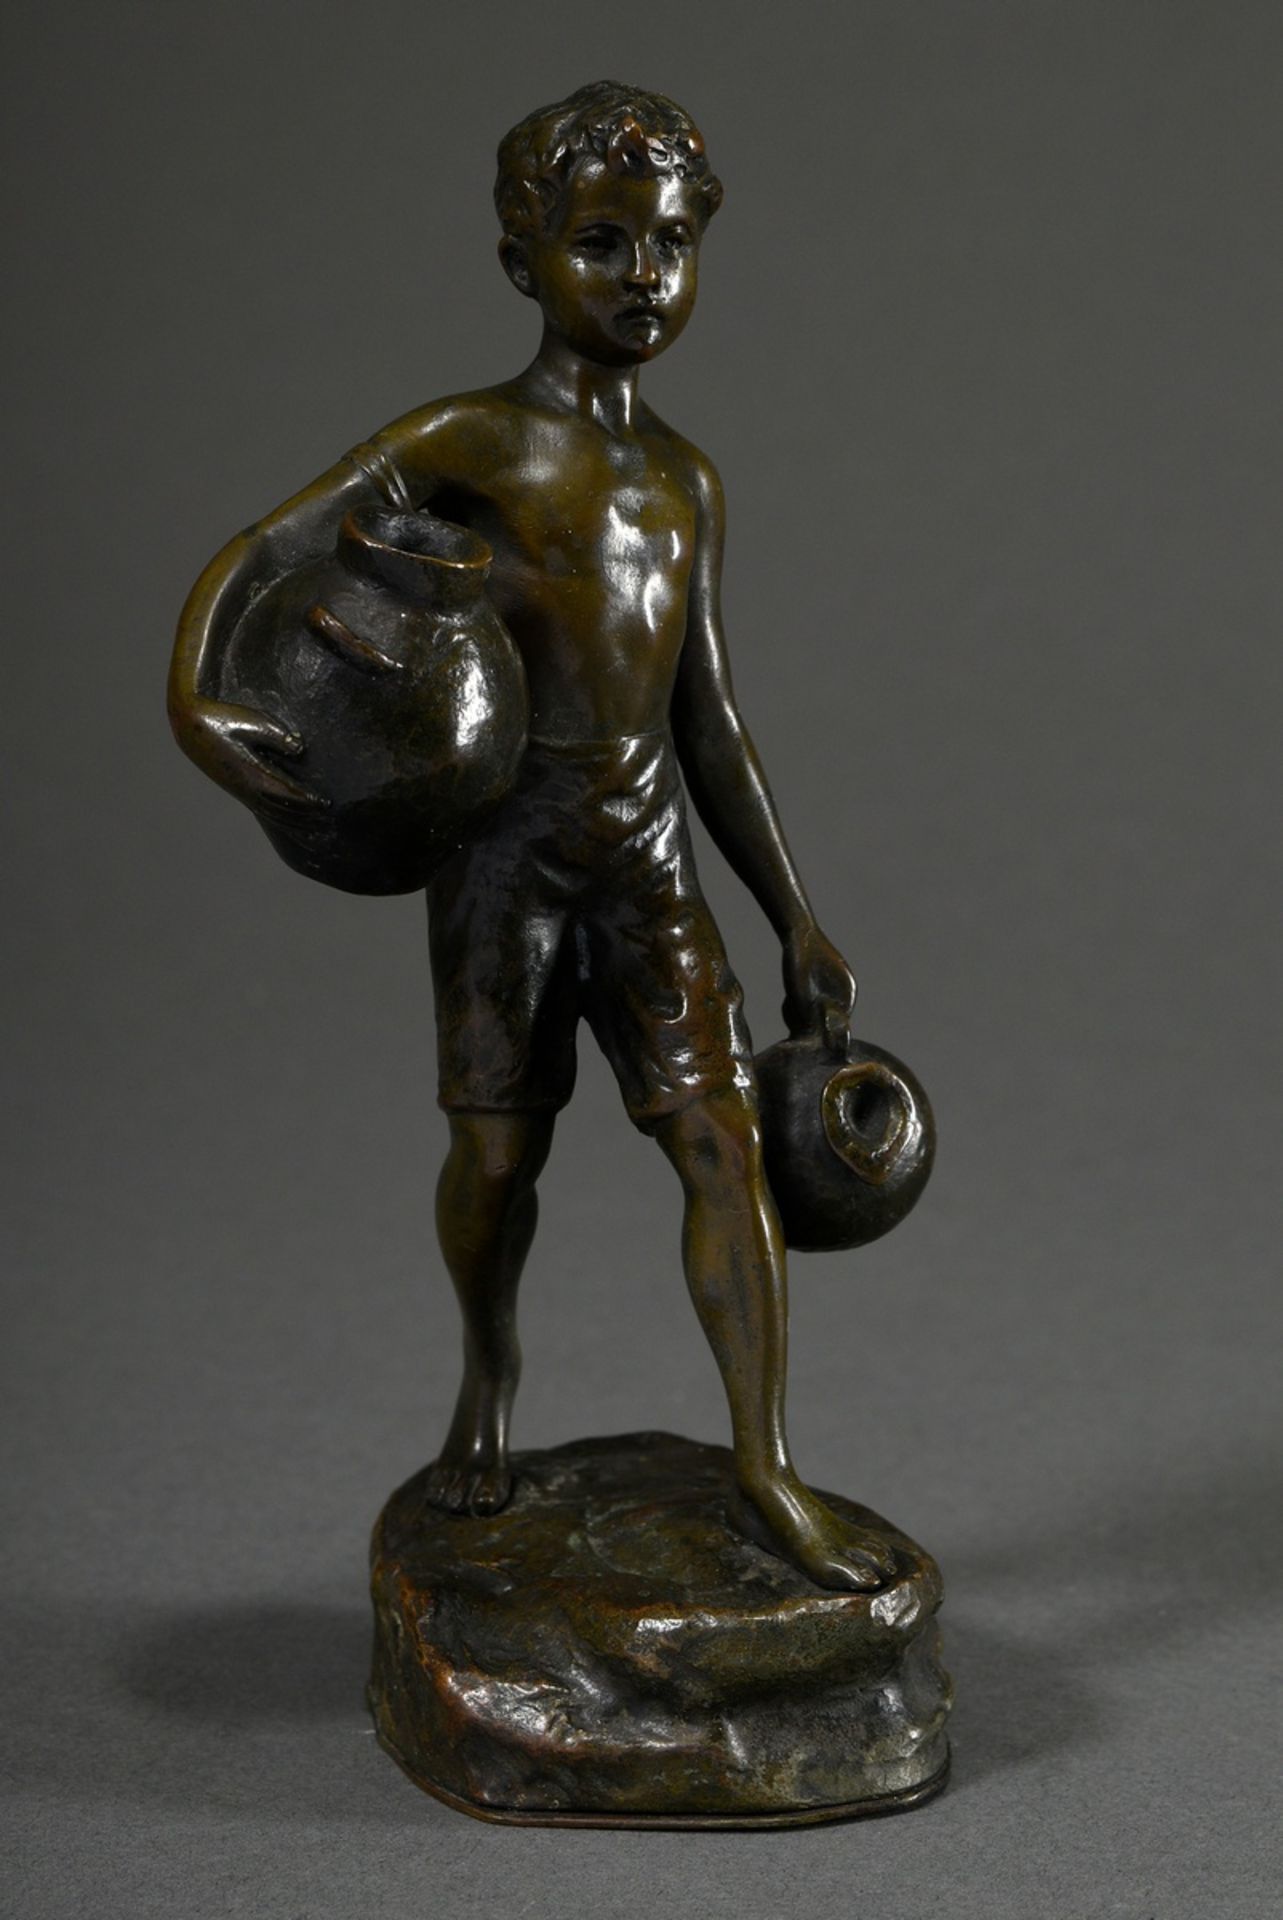 Besserdich, Ruffino (1852-1915) "Water carrier", on a naturalistic plinth, patinated bronze, signed